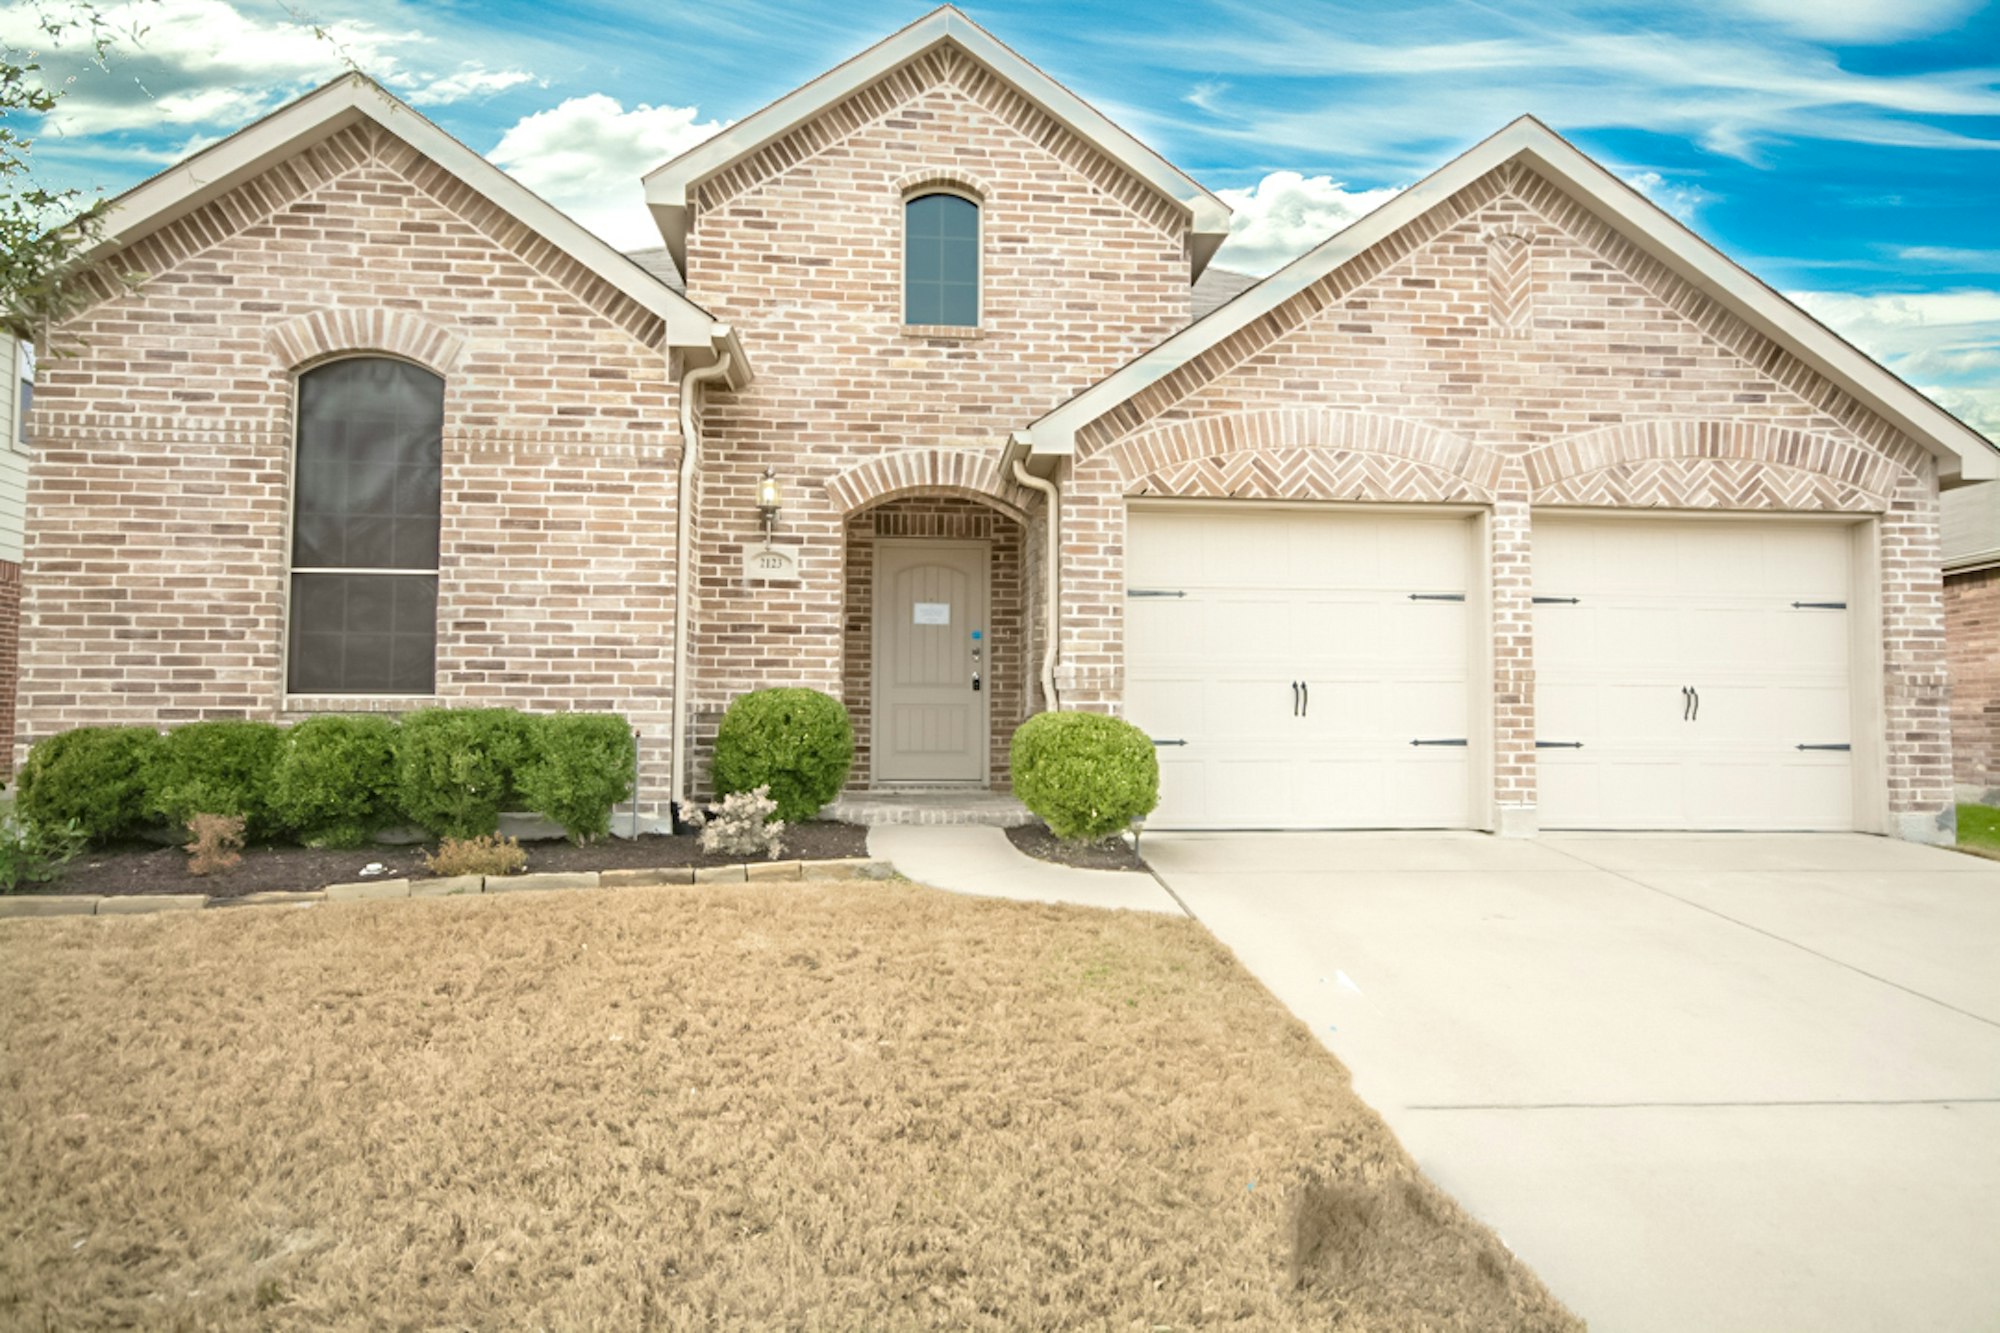 Photo 1 of 23 - 2123 Rains County Rd, Forney, TX 75126